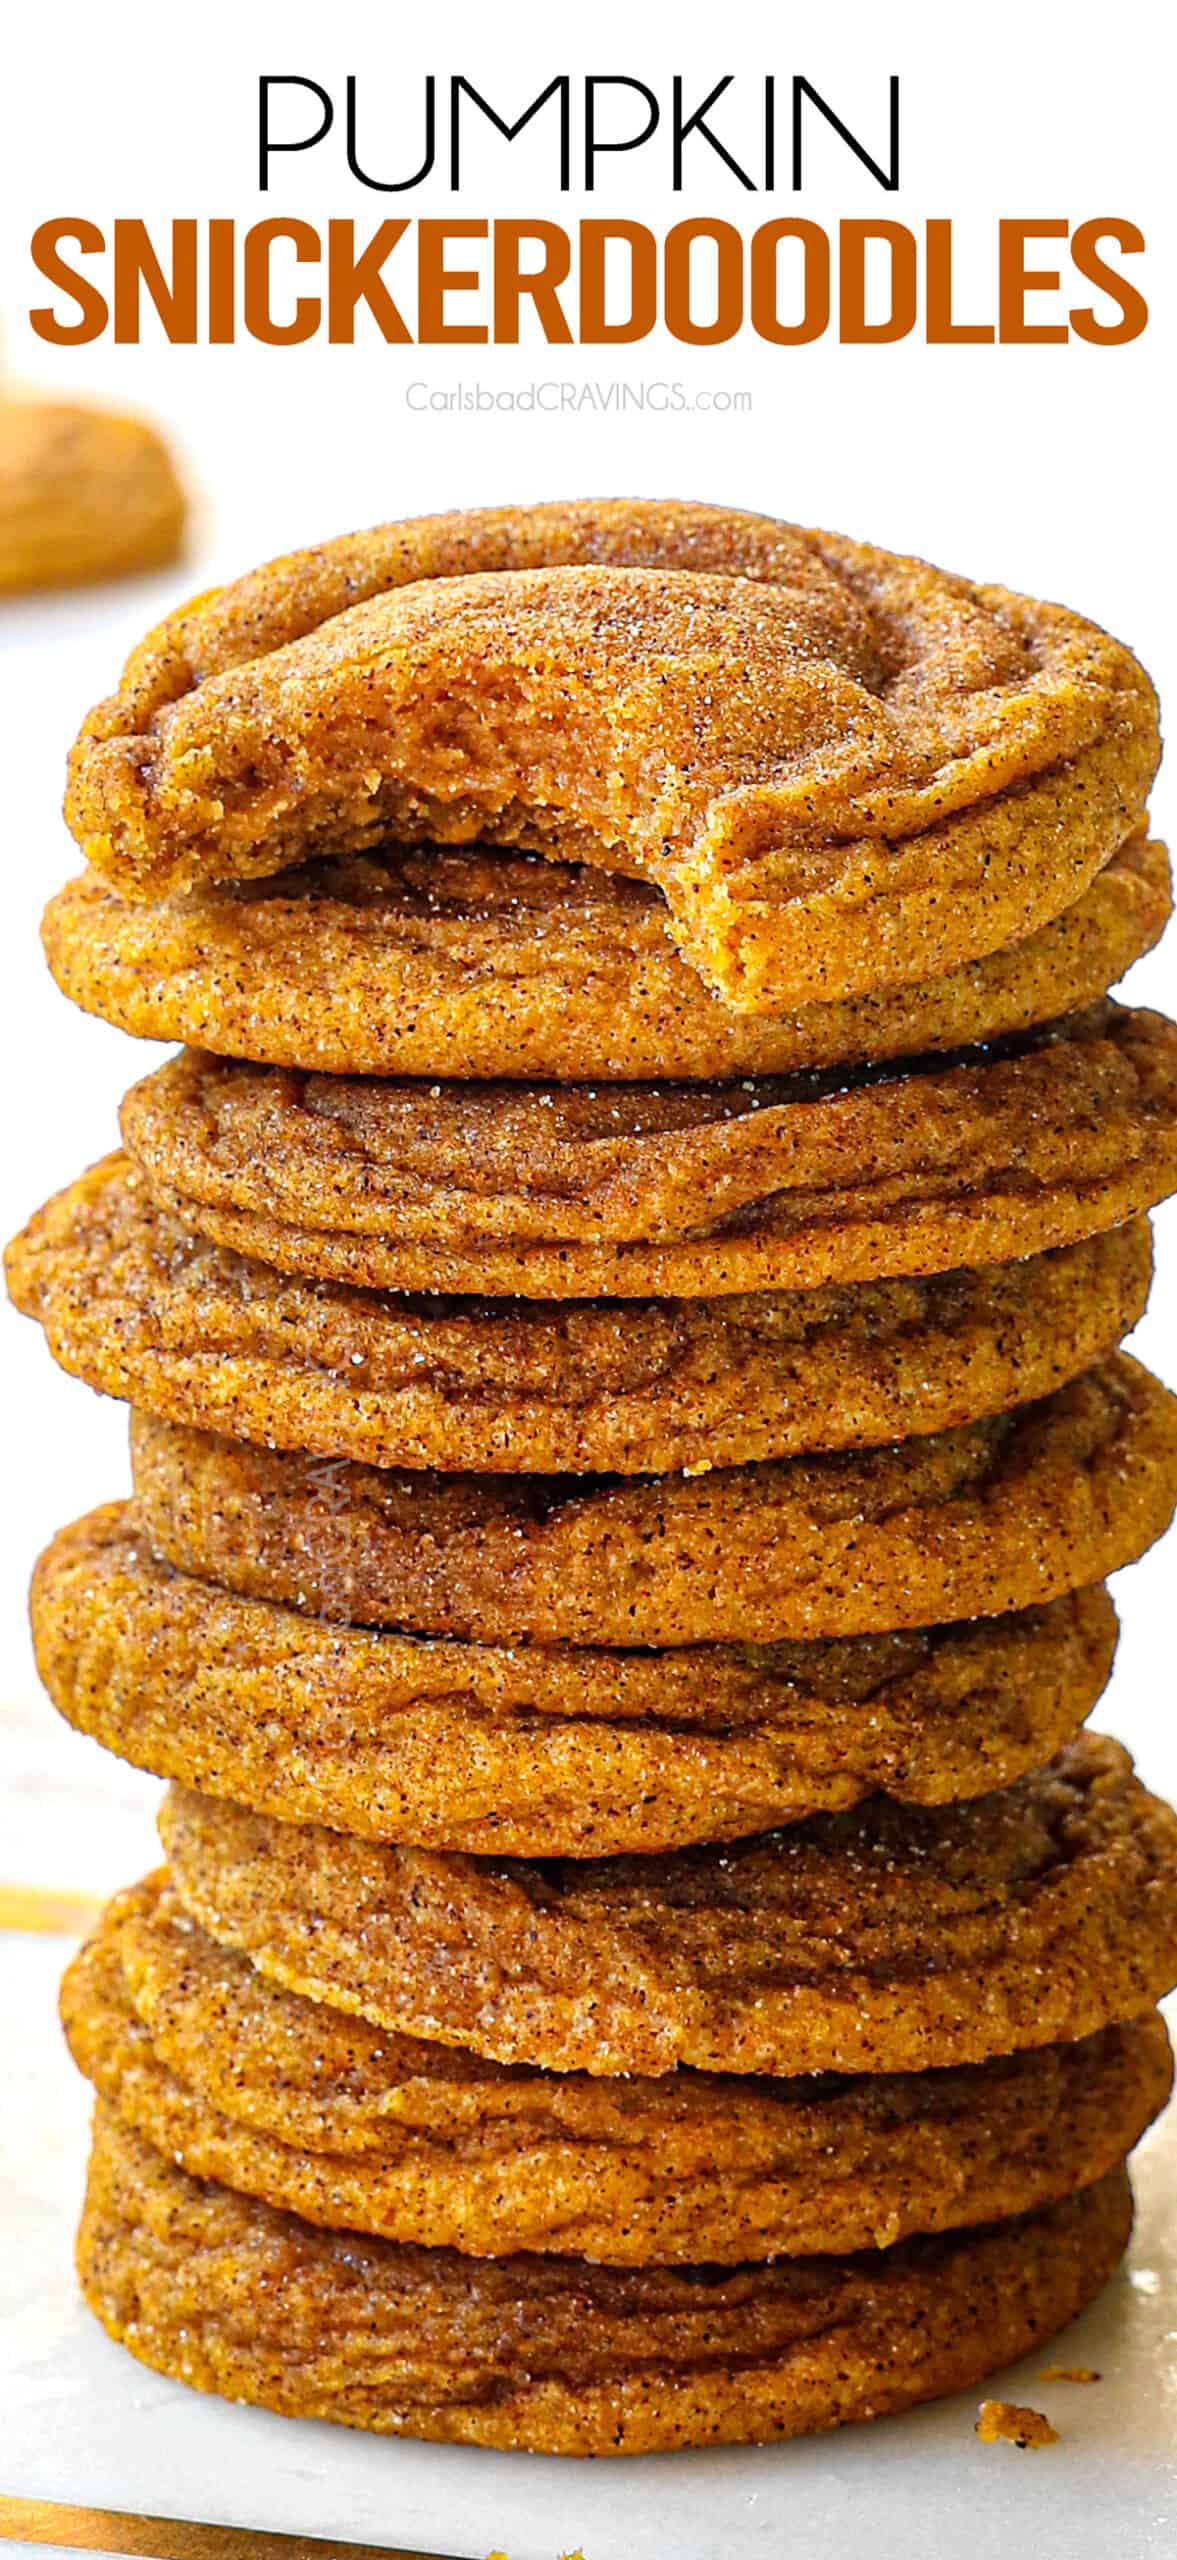 pumpkin snickerdoodles stacked showing how thick and chewy they are